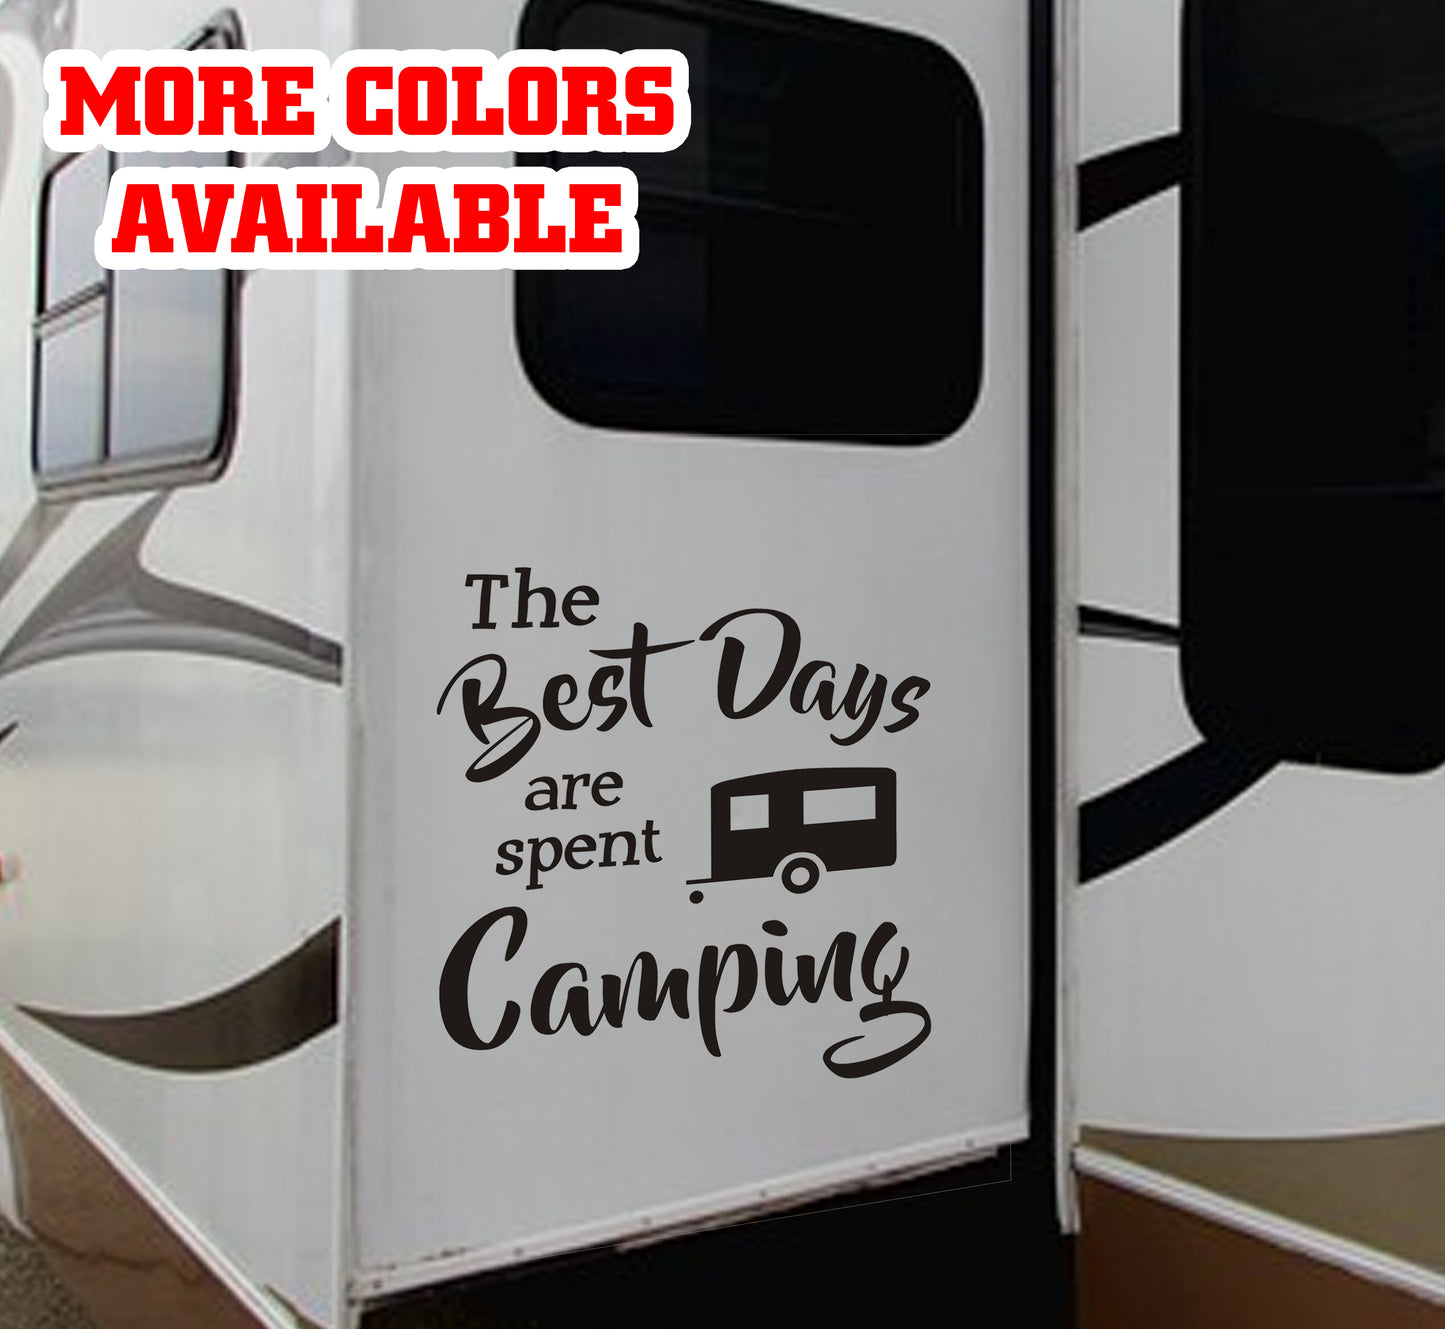 The Best Days are spent Camping Vinyl Sticker Decal Graphic | RV Slide Decal RV Door Decal Travel Trailer Camper